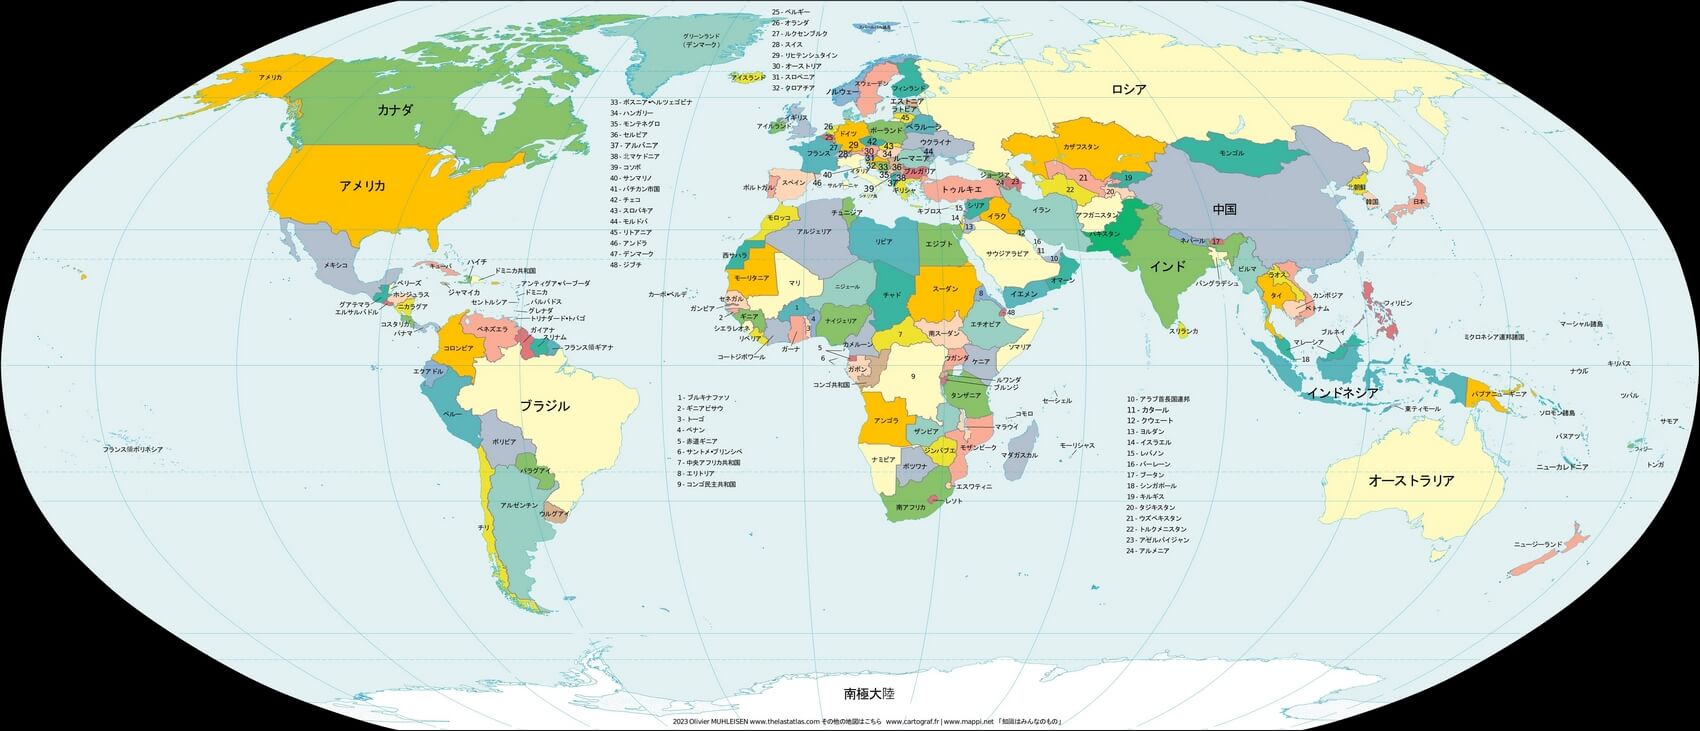 World map countries in Japanese